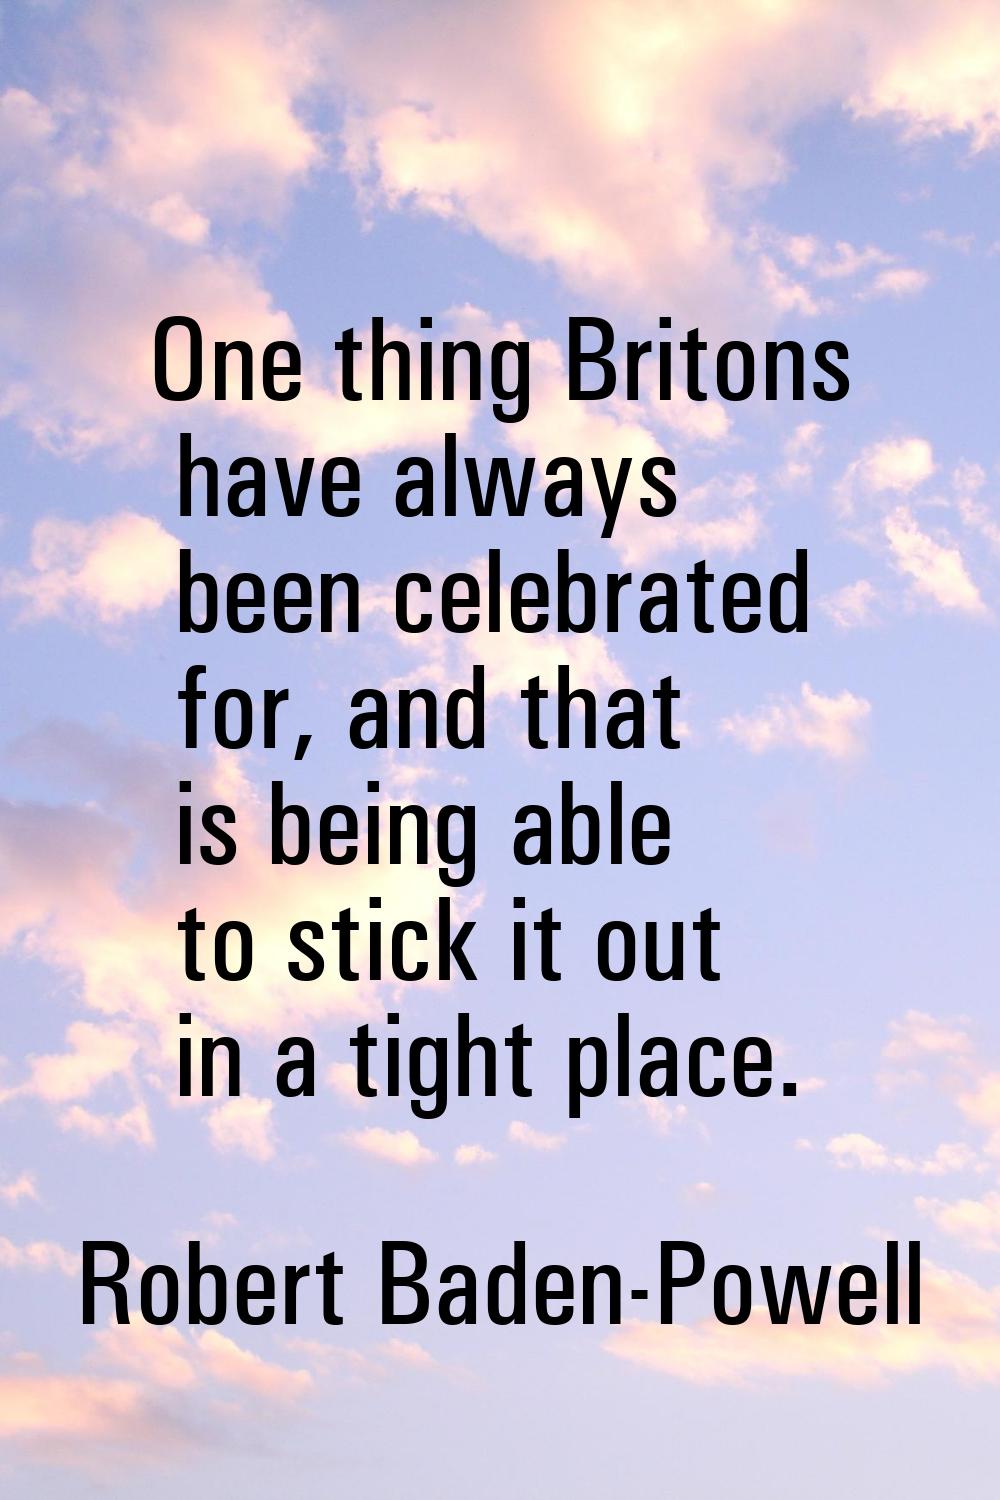 One thing Britons have always been celebrated for, and that is being able to stick it out in a tigh